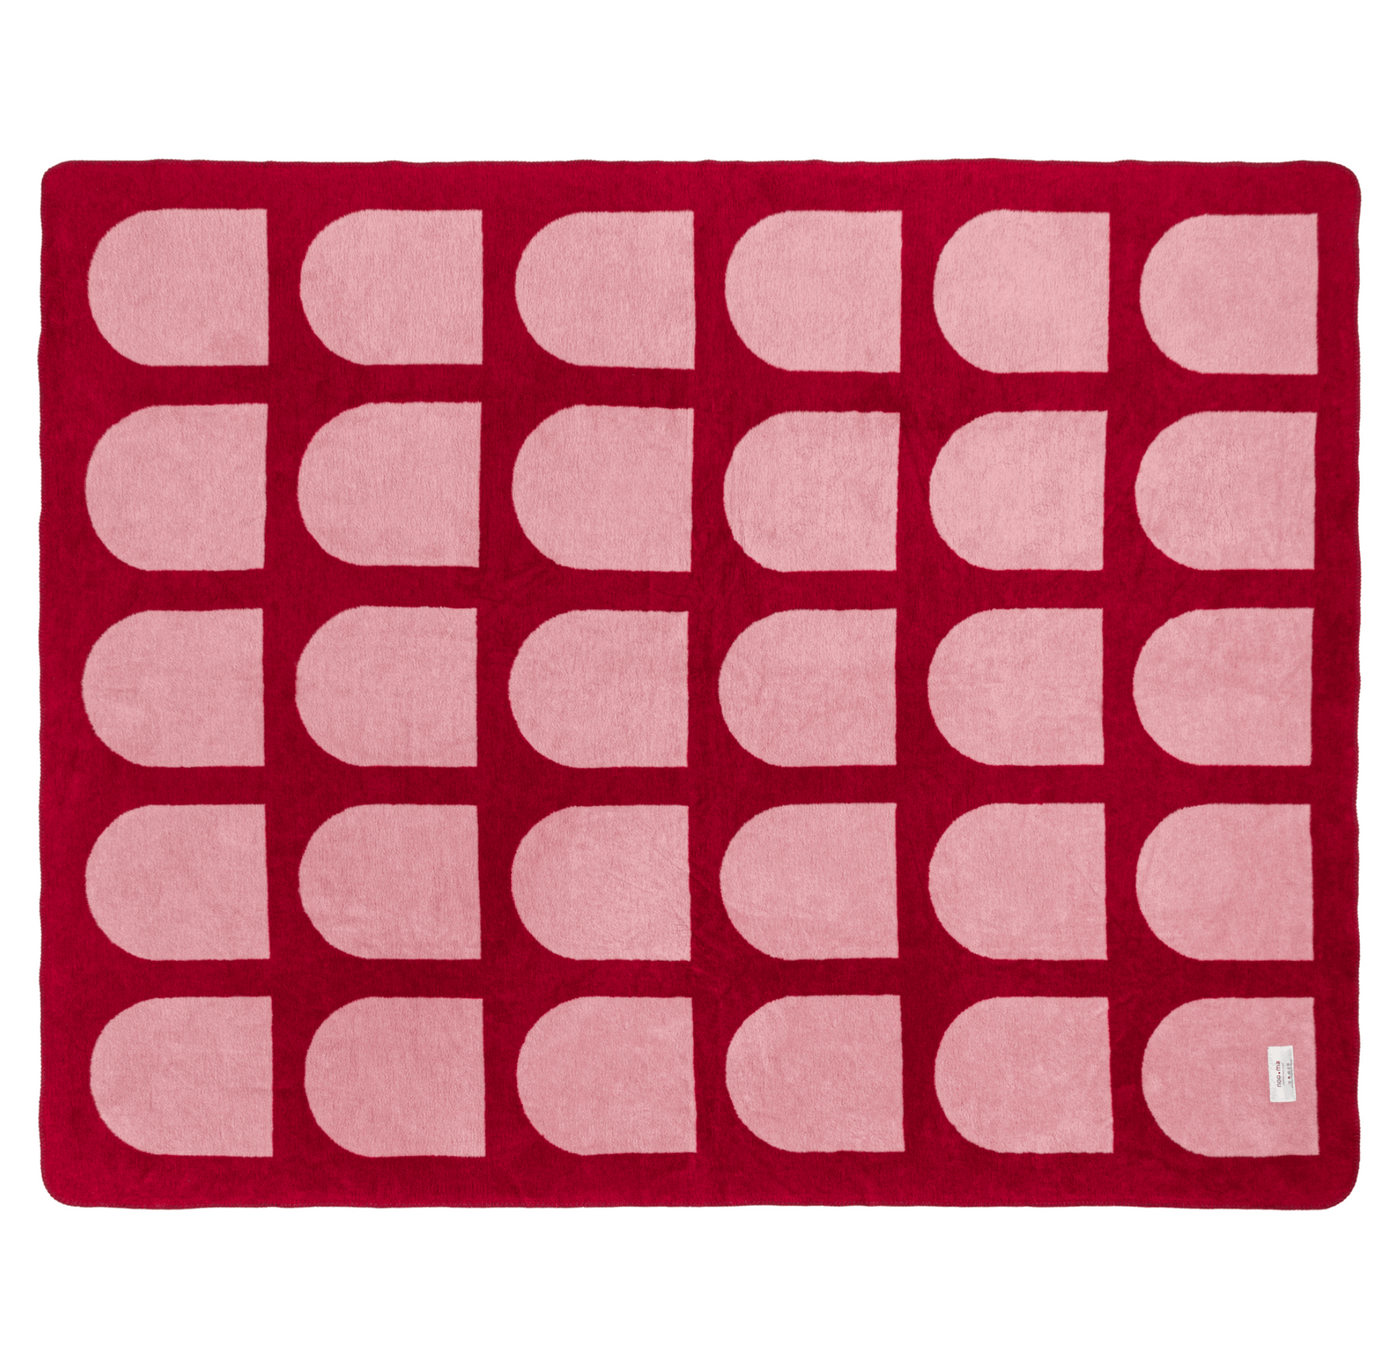 Gilli Throw in Blossom Pink / Cherry Juice